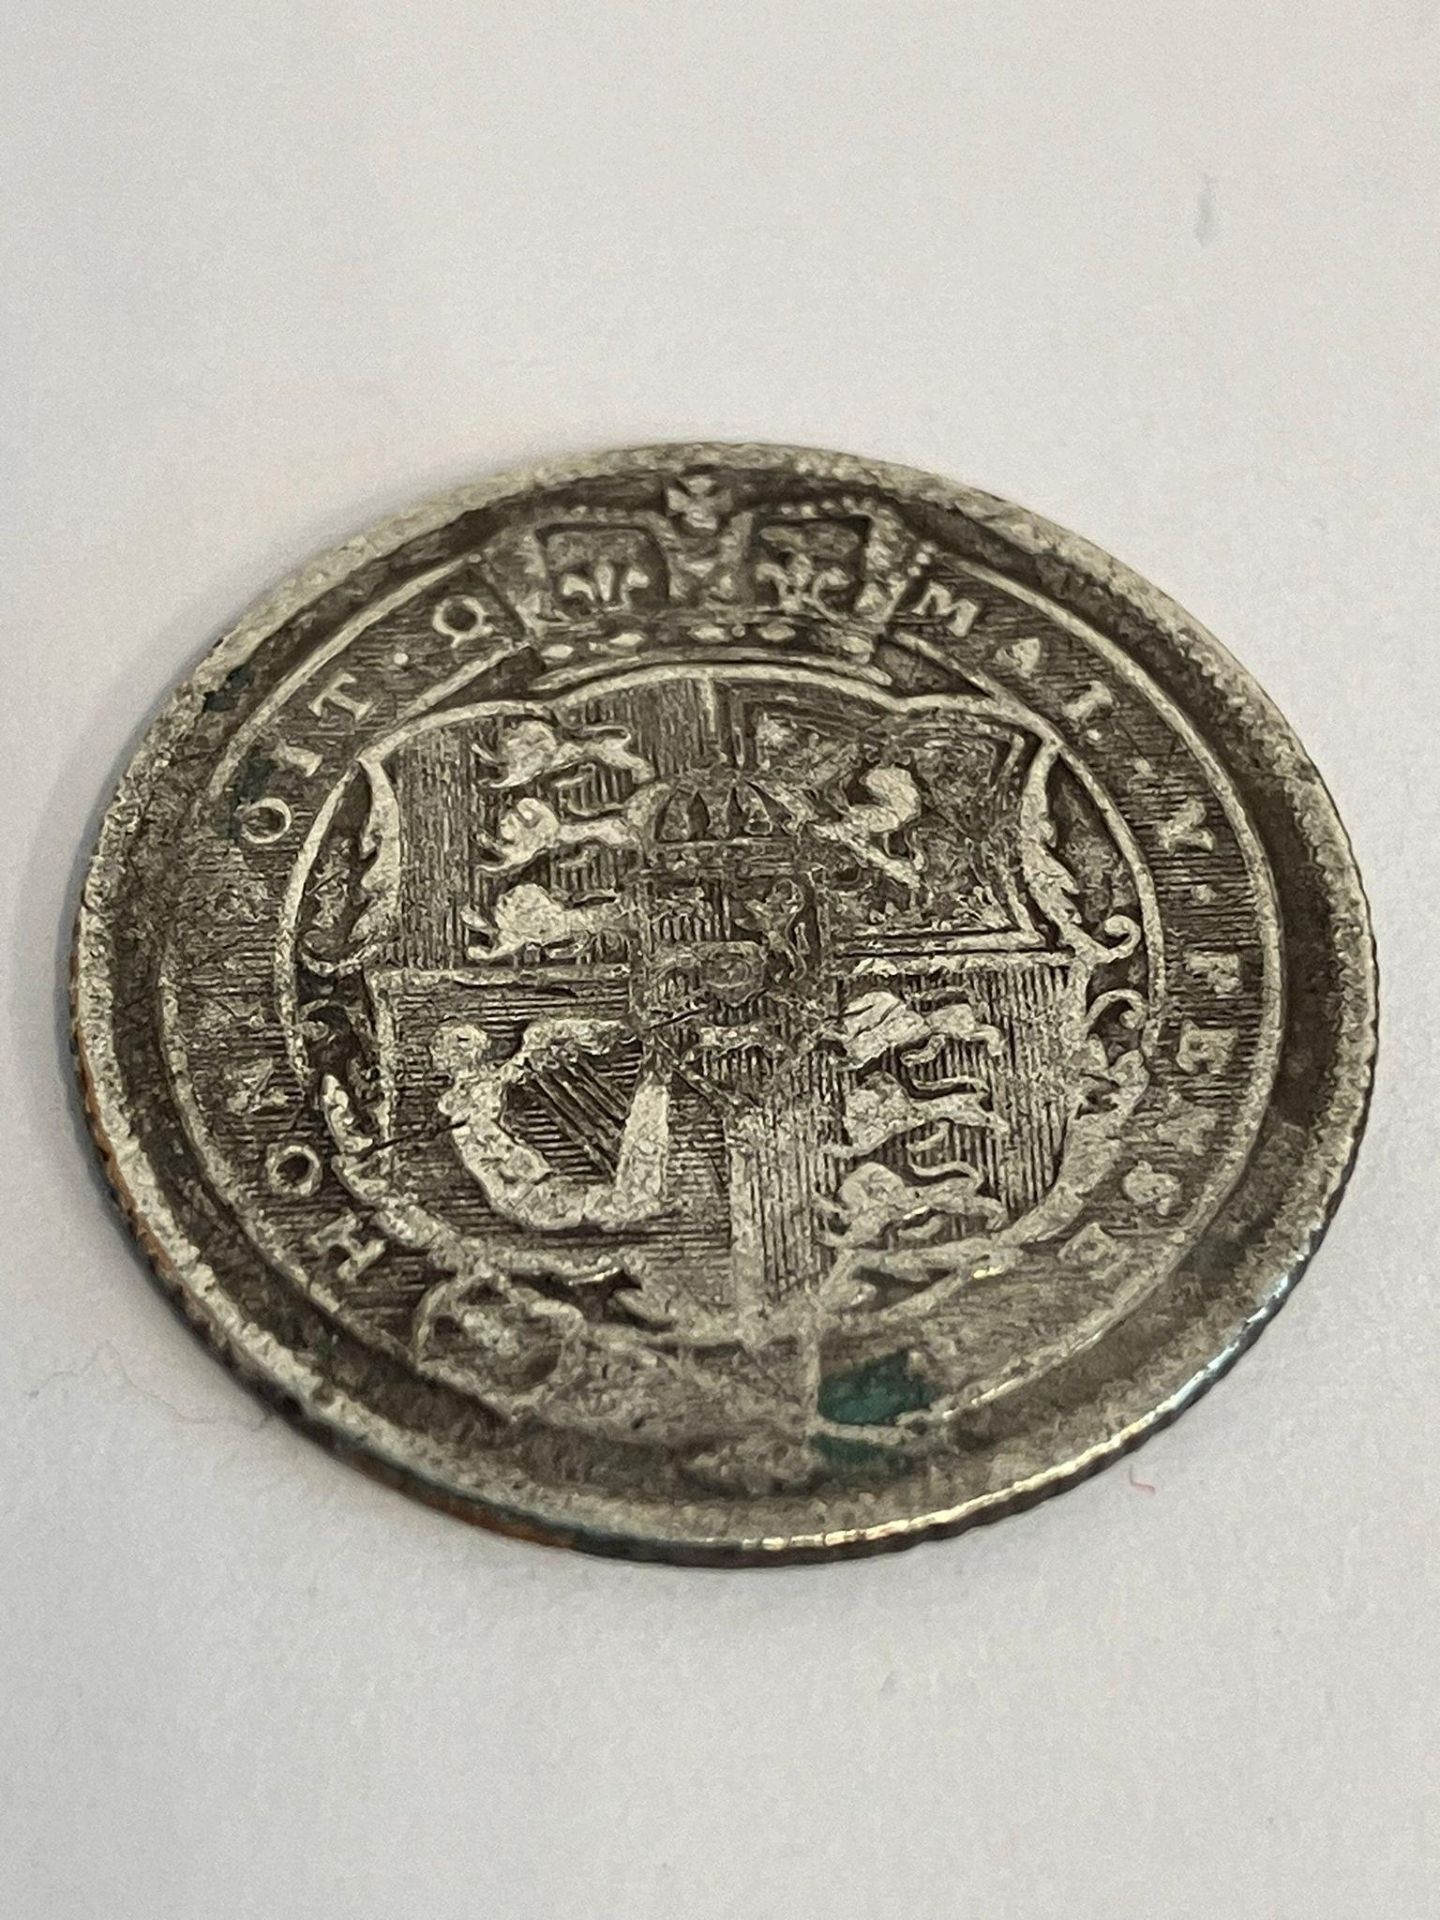 1818 GEORGE III SILVER SIXPENCE. condition fine/very fine, could use a clean. - Image 3 of 3